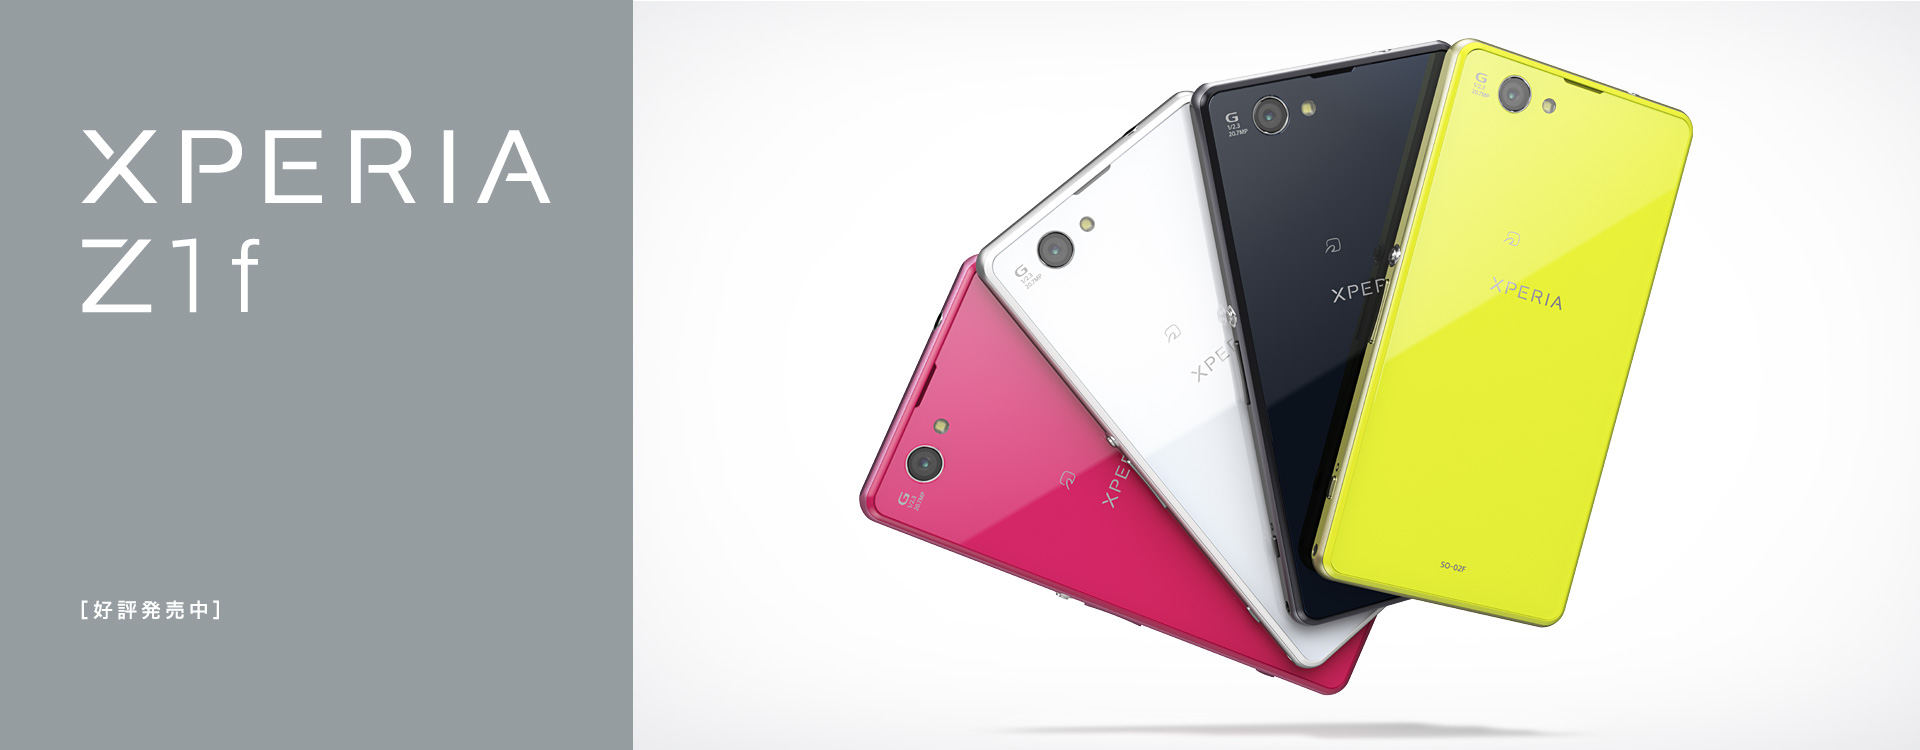 related-entry-thumb:購入レビュー Xperia Z1f がやってきた！